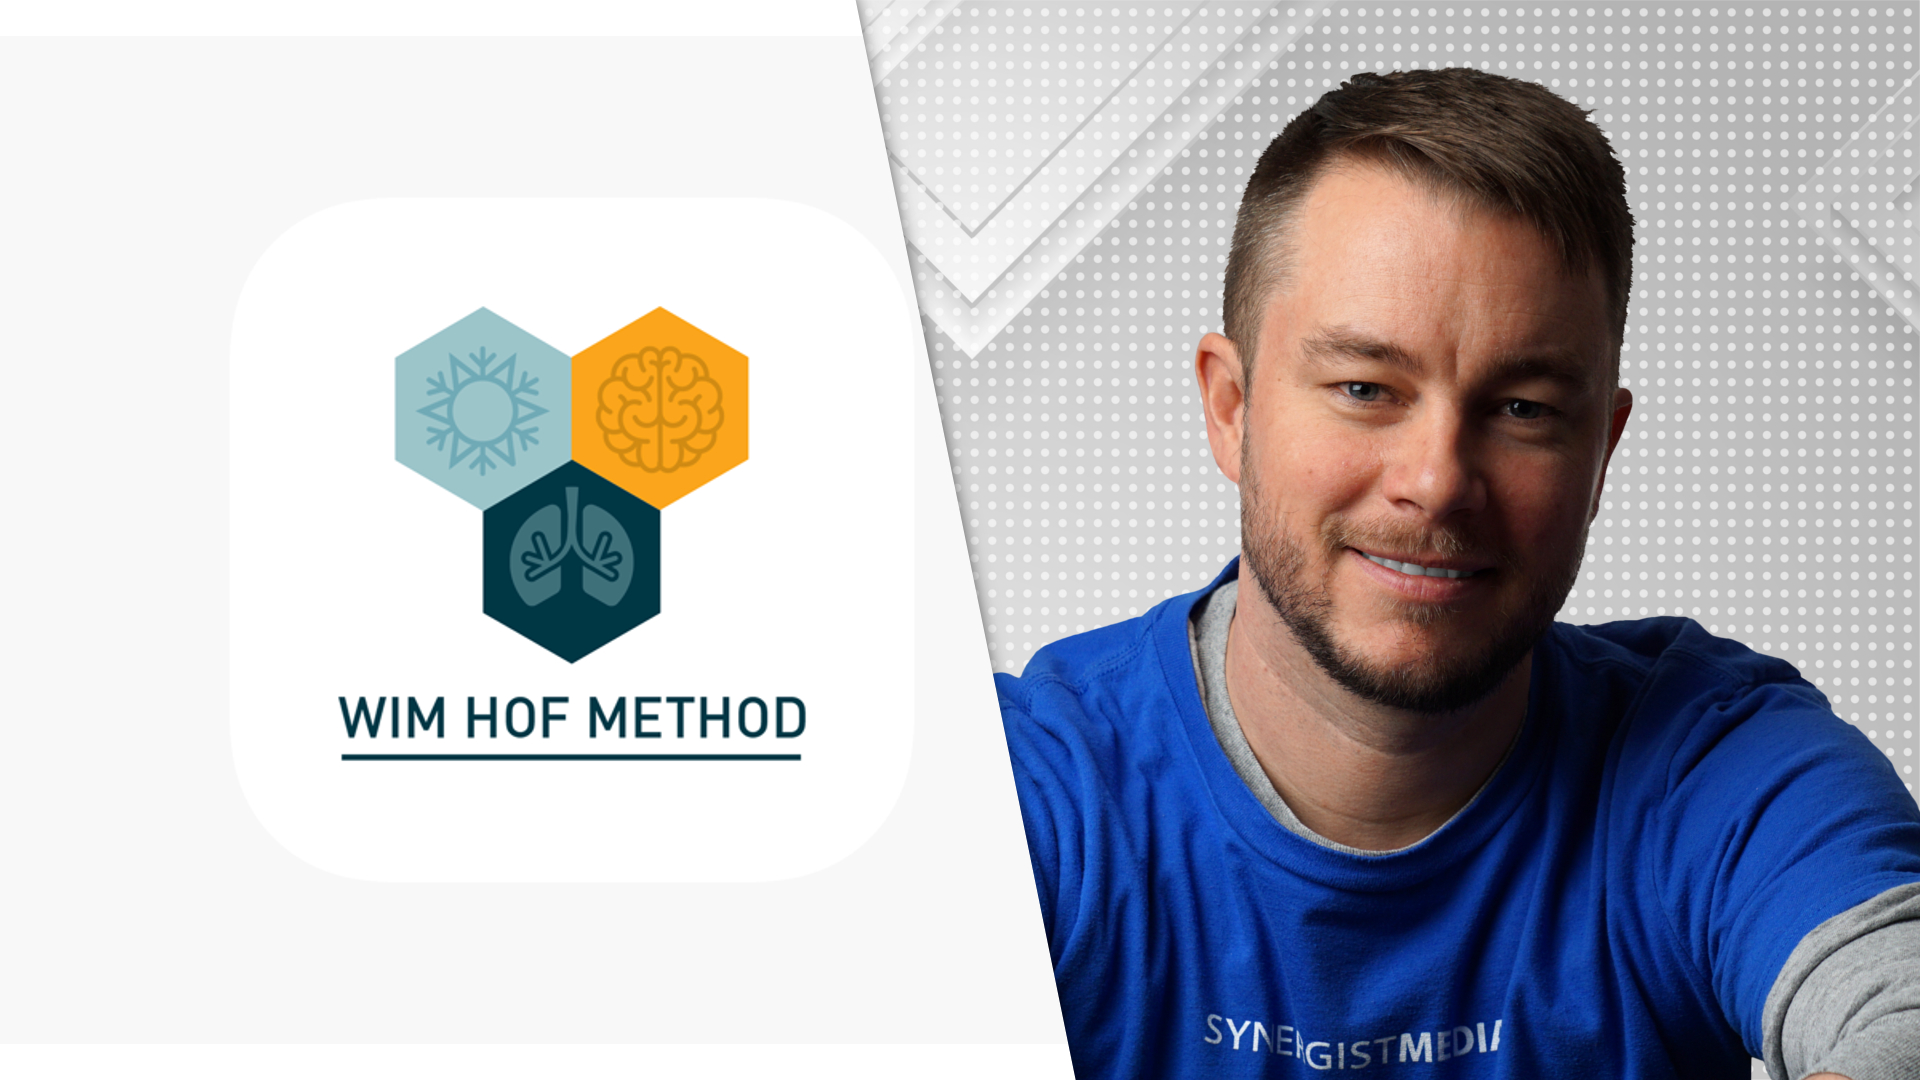 Jay Woodford - Wim Hof Method - Cold Water Therapy & Breath Work - WHM Resources